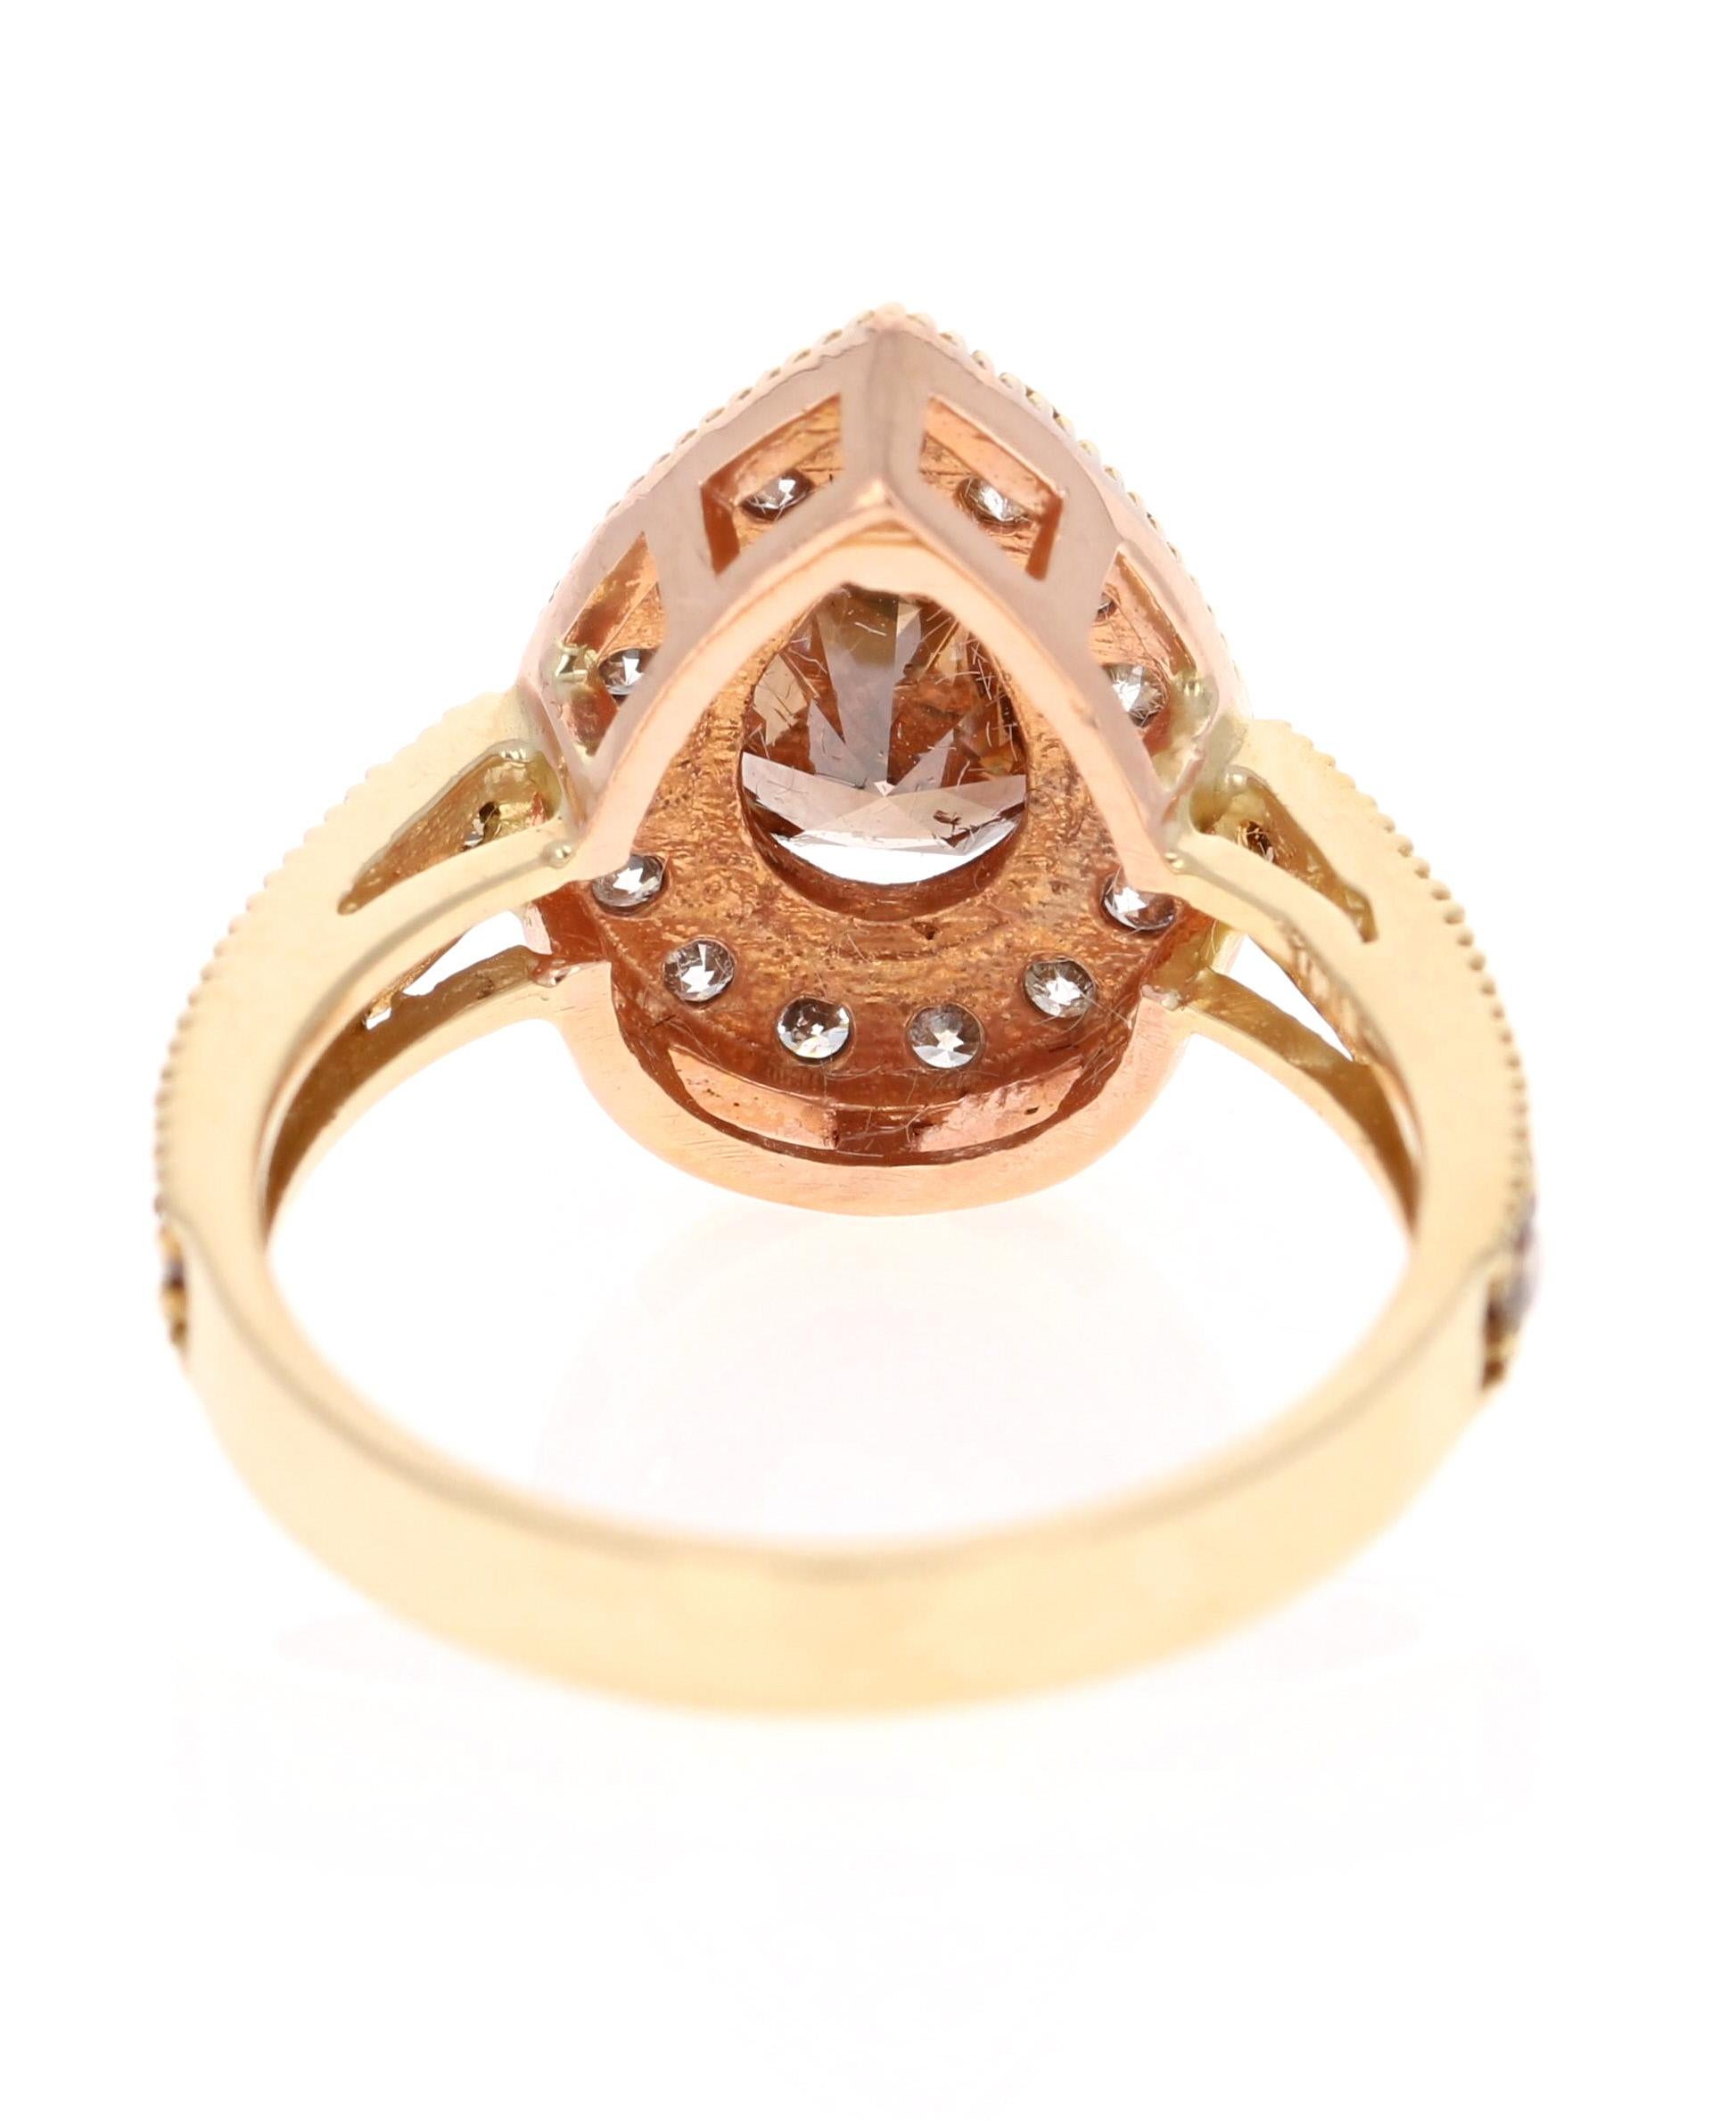 Contemporary 2.77 Carat Fancy Brown Champagne Natural Diamond Engagement Ring For Sale